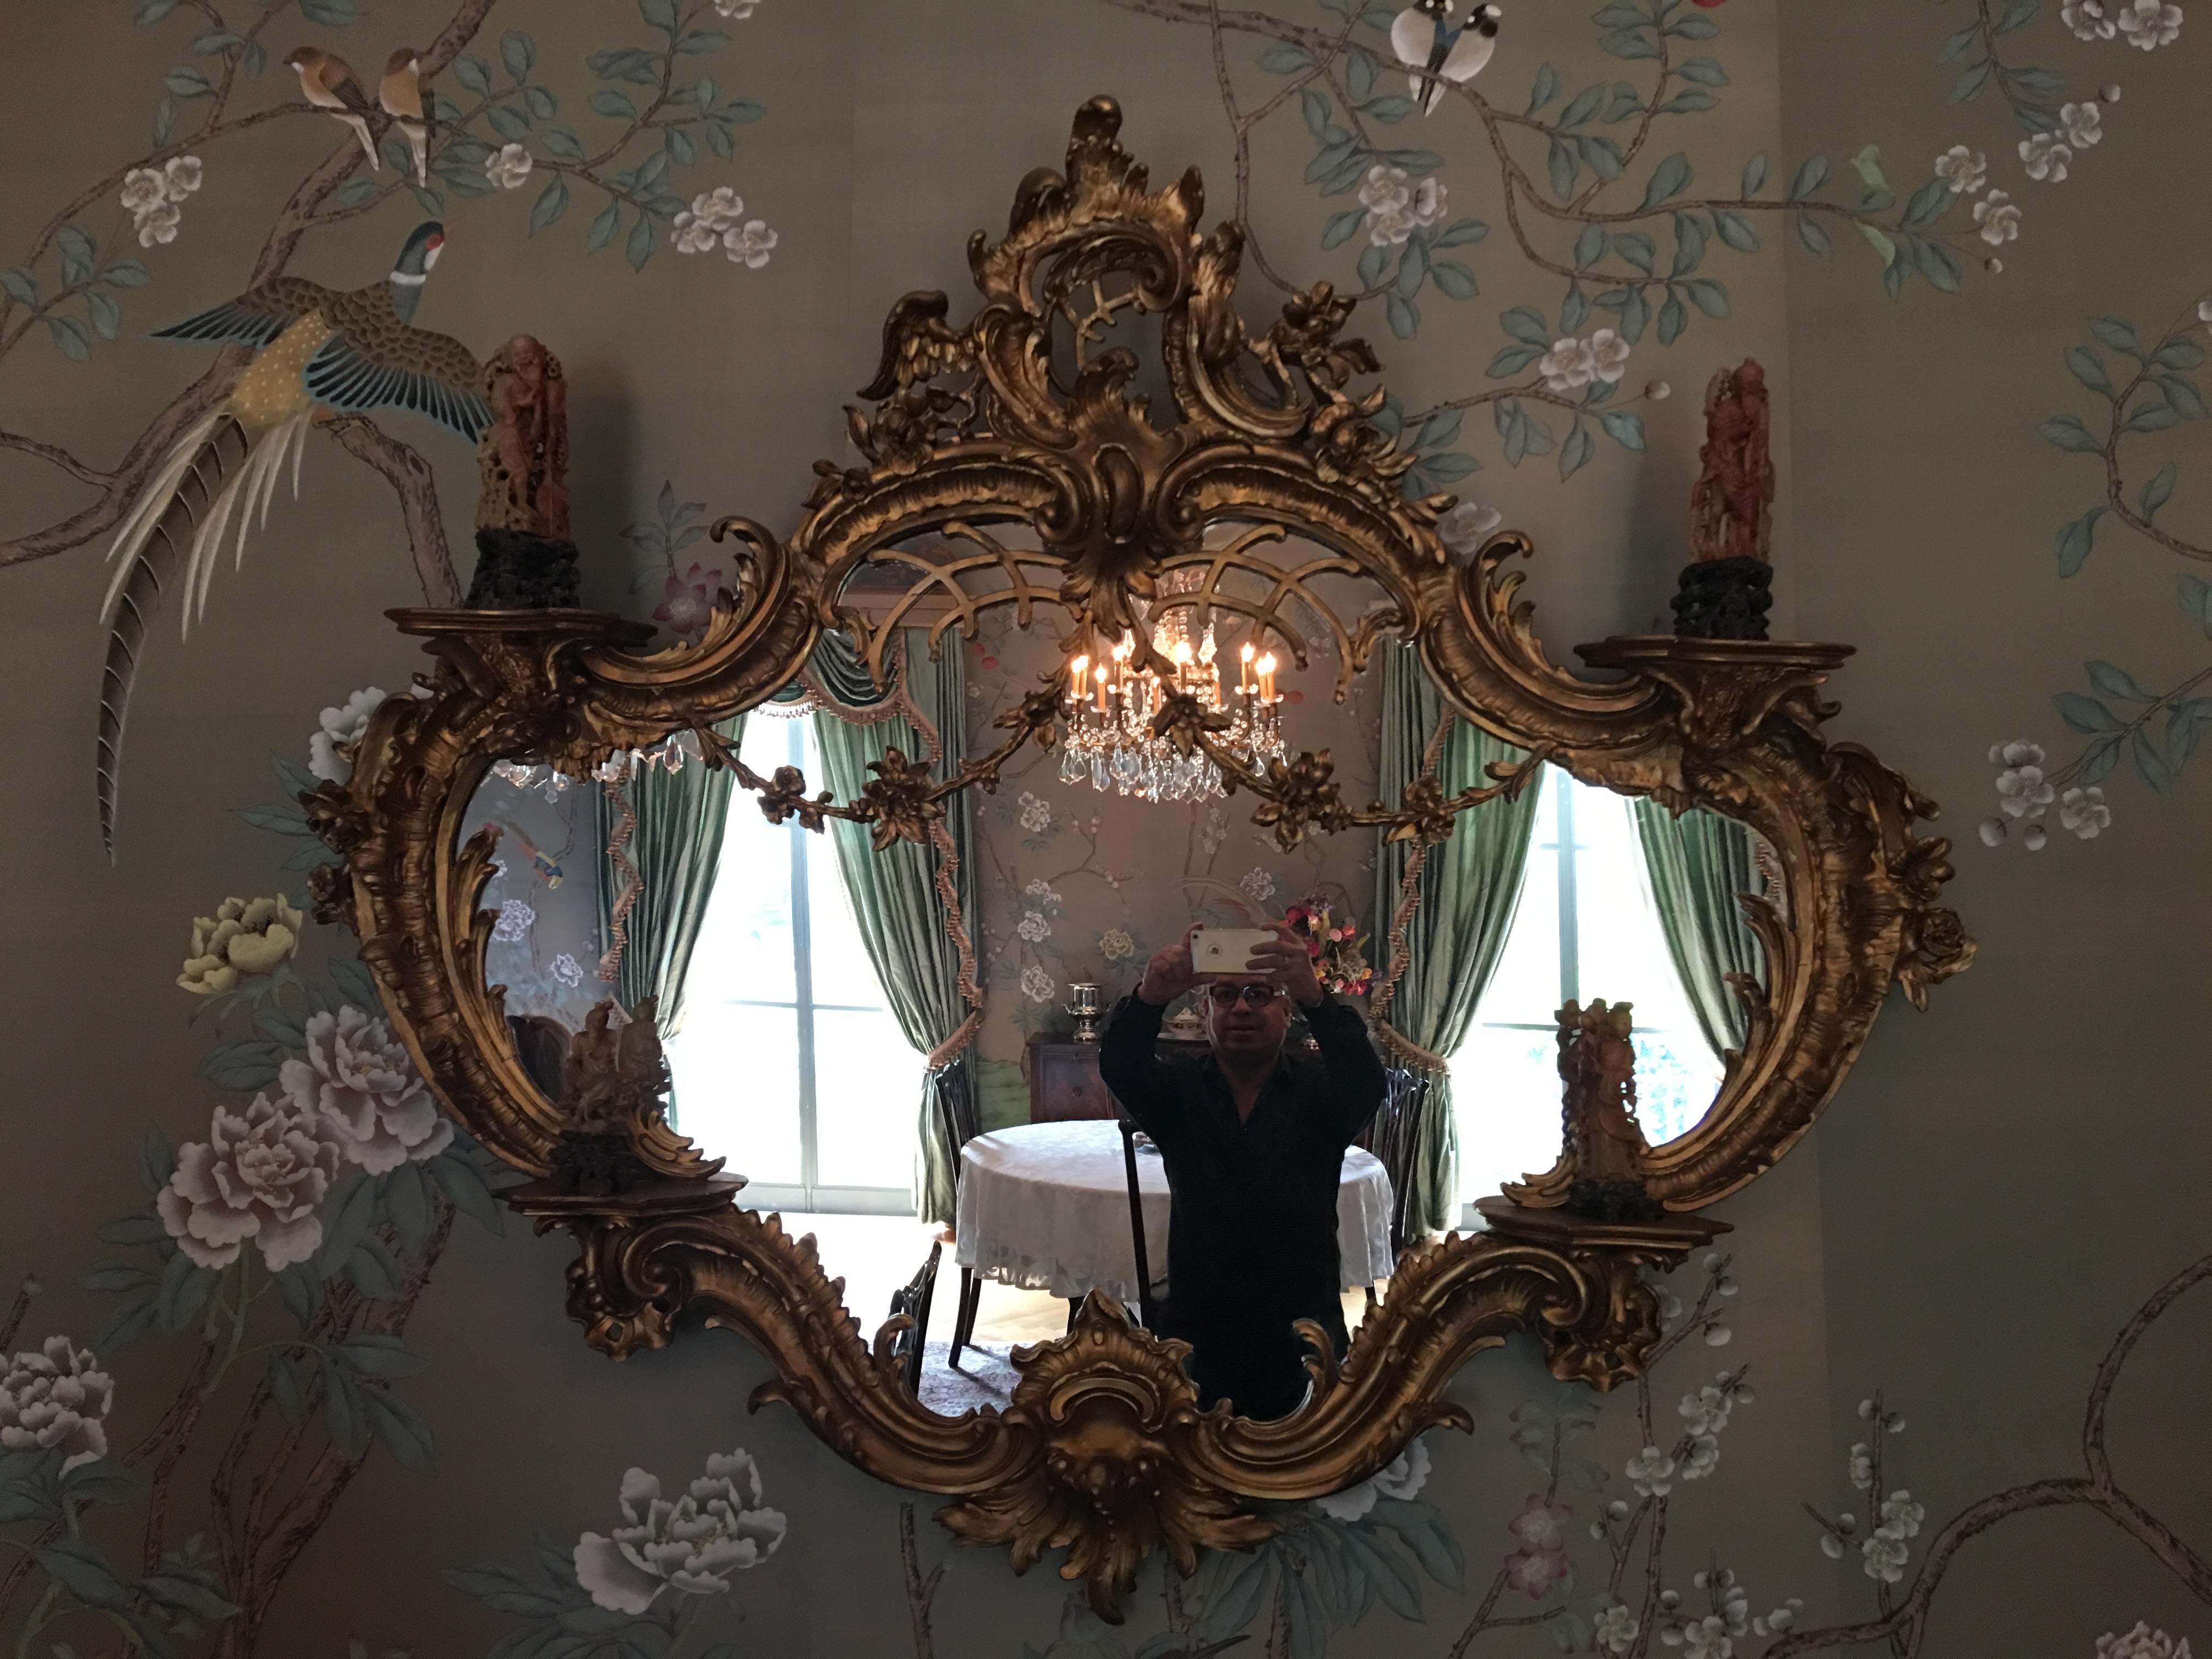 Large giltwood mirror in the Chinese style, early 20th century. The mirror has two shelves like to display Asian items or anything of your choice.